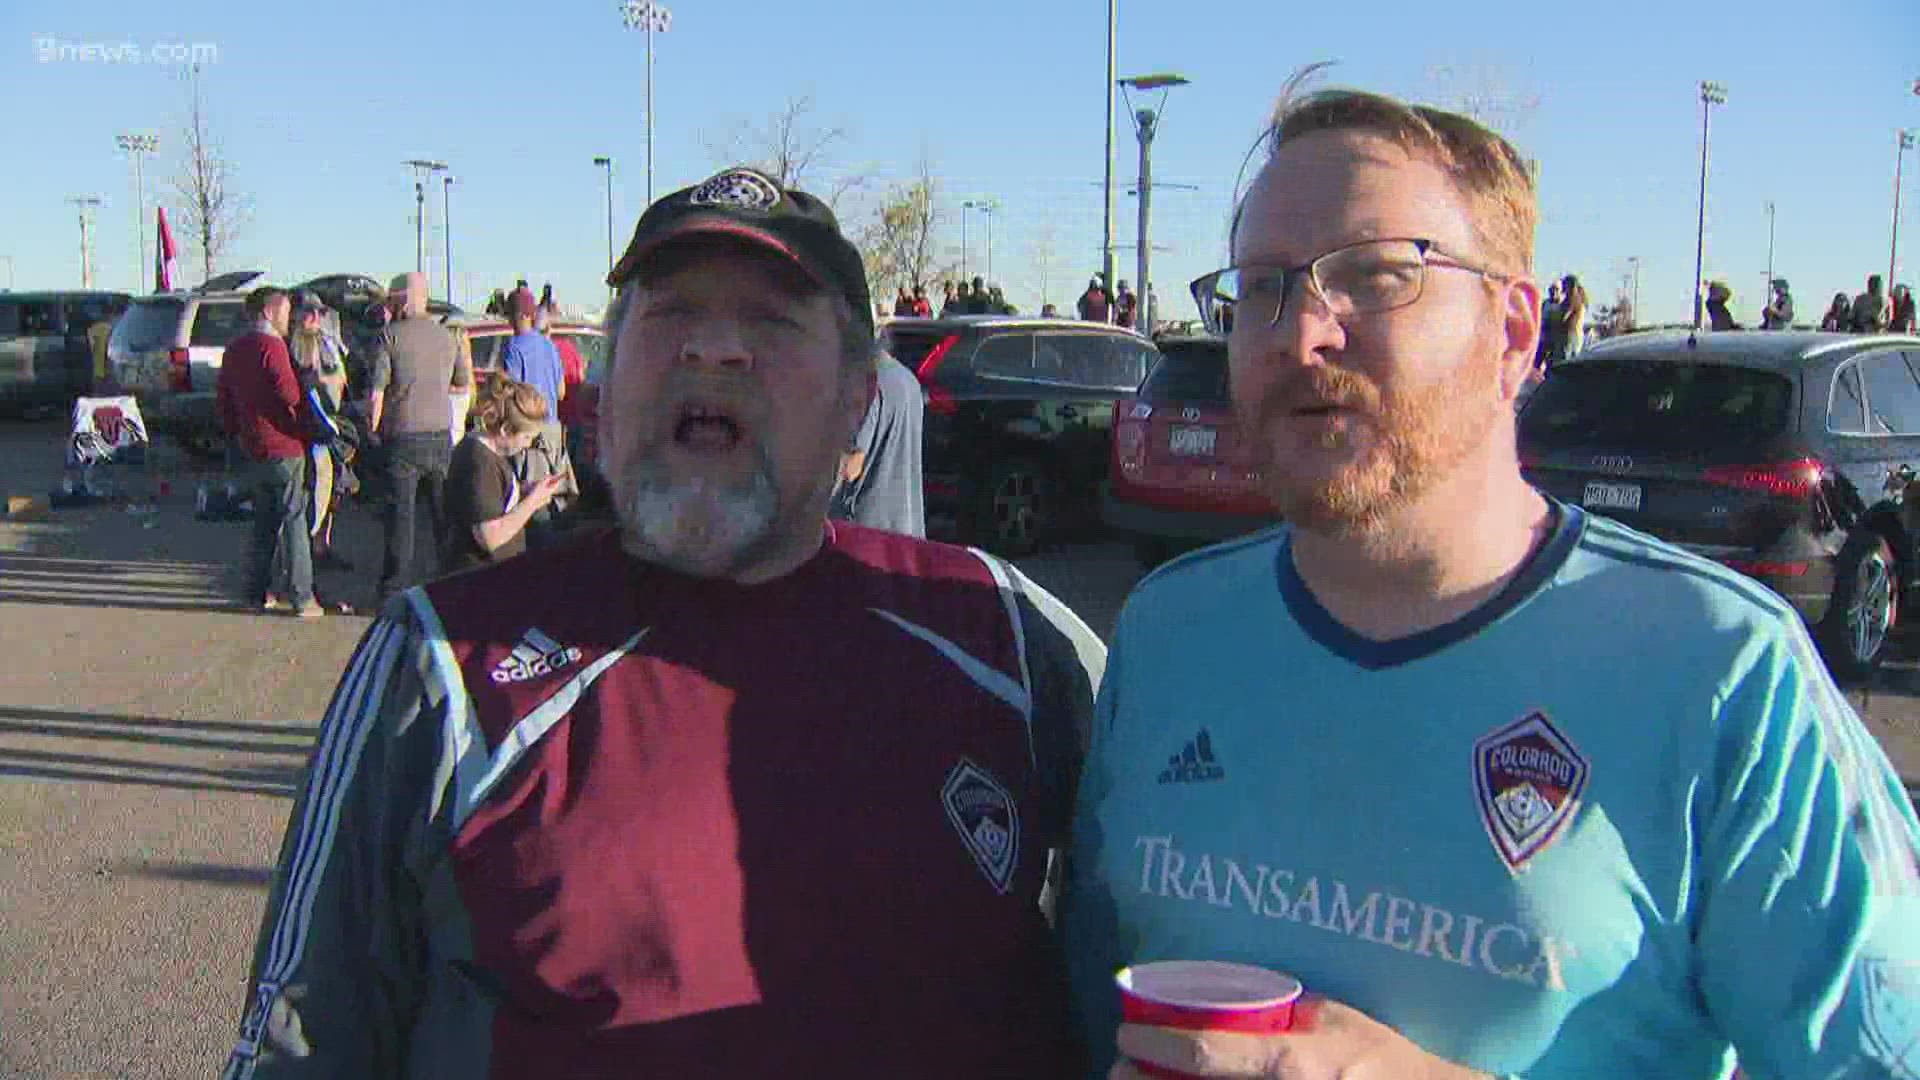 The Colorado Rapids finished with the most points in team history and took first place in the Western Conference for the first time ever.